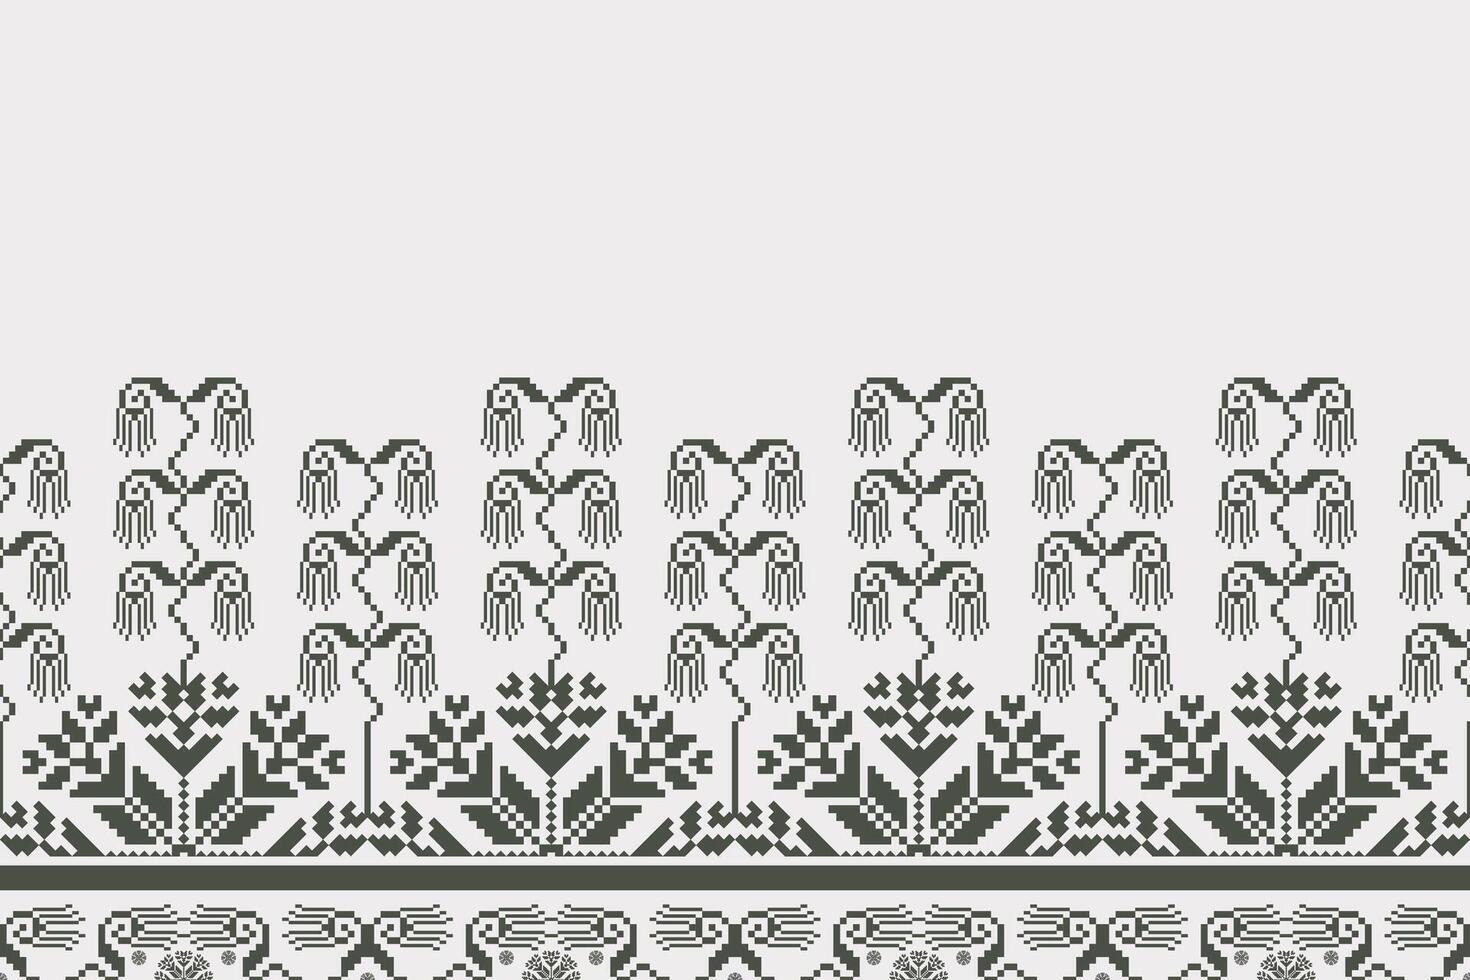 Monochrome gray ethnic floral embroidery pattern. Abstract ethnic floral embroidery geometric monochrome seamless pattern. Use for textile border, tablecloth, table runner, wallpaper, cushion. vector